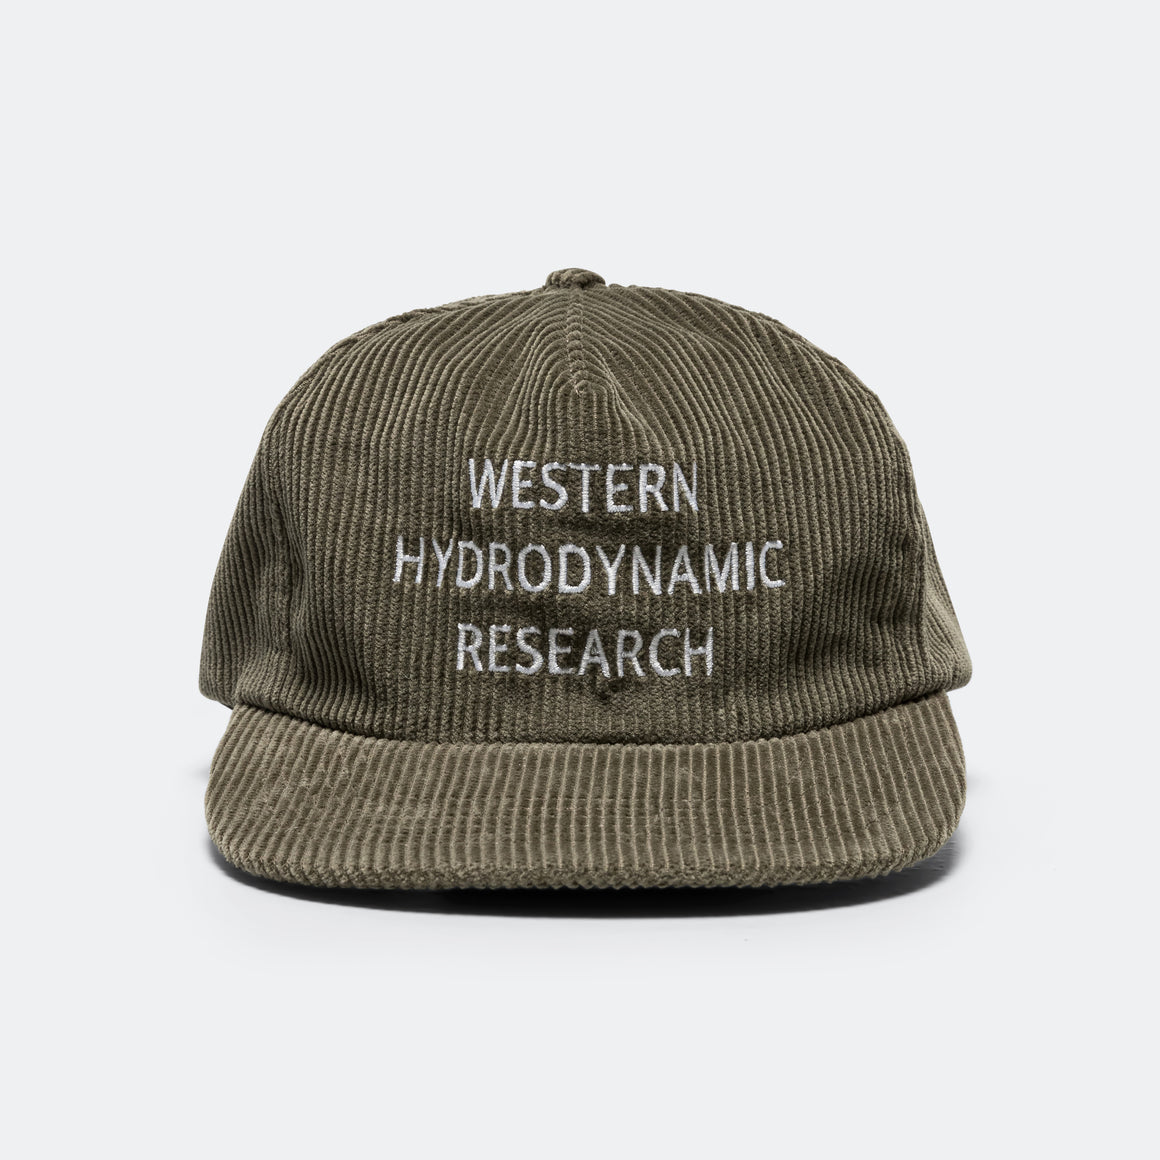 Western Hydrodynamic Research - Whale Cord Hat - Green Olive - UP THERE